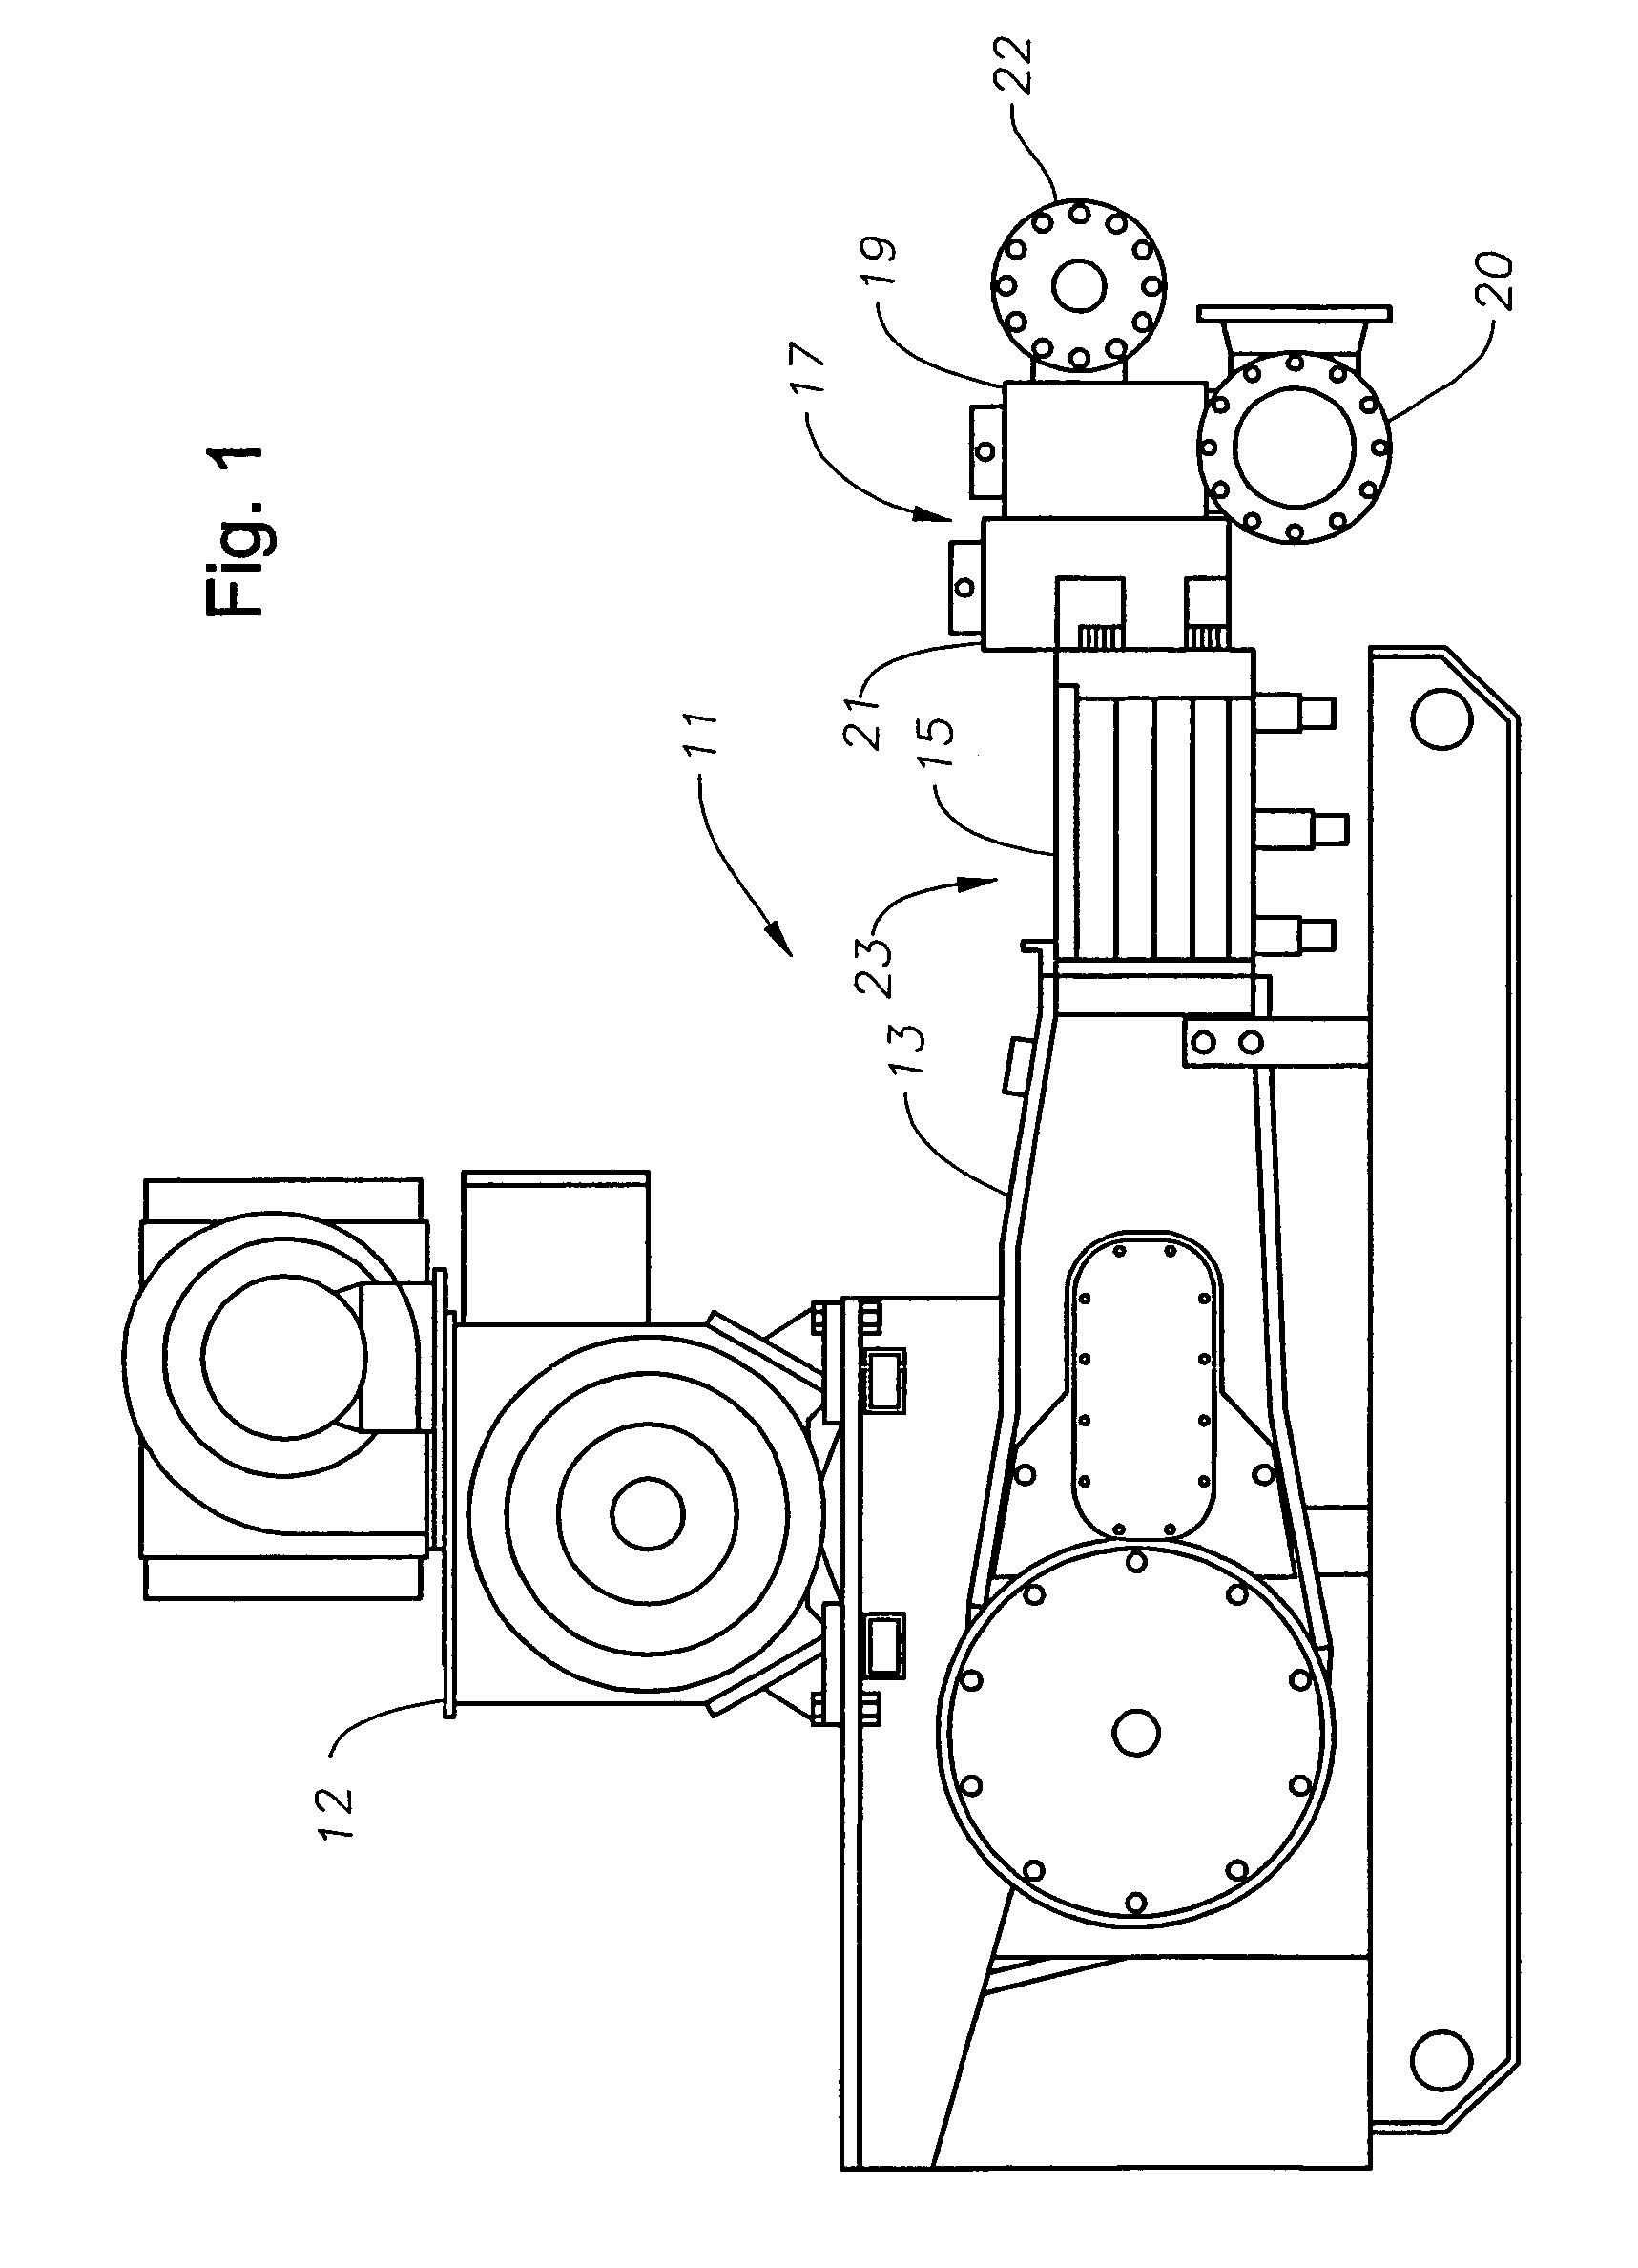 Manifold assembly for reciprocating pump